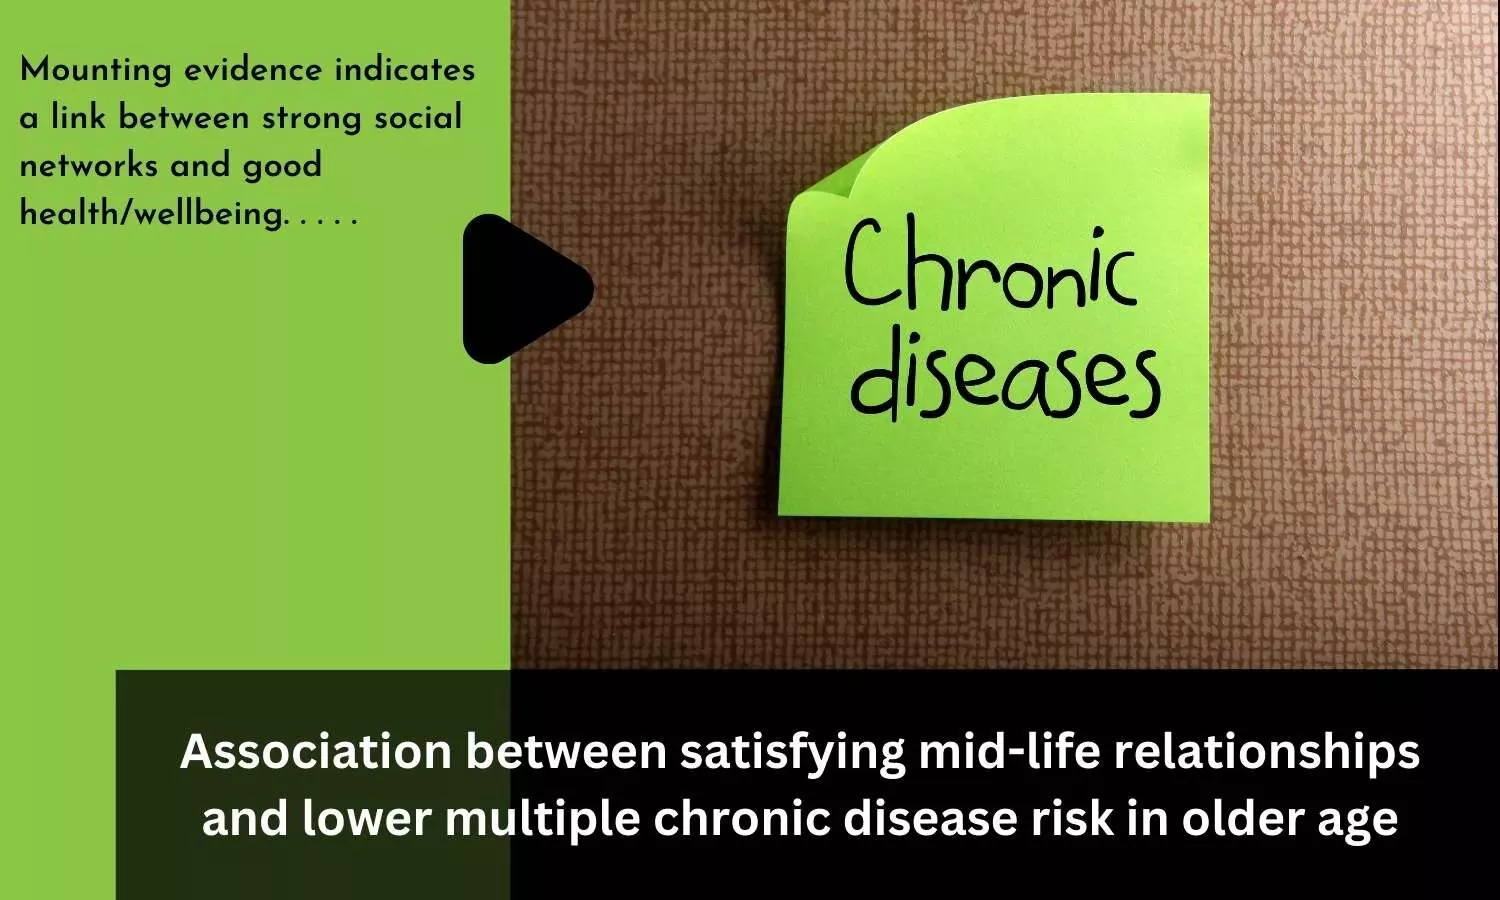 Association between satisfying mid-life relationships and lower multiple chronic disease risk in older age